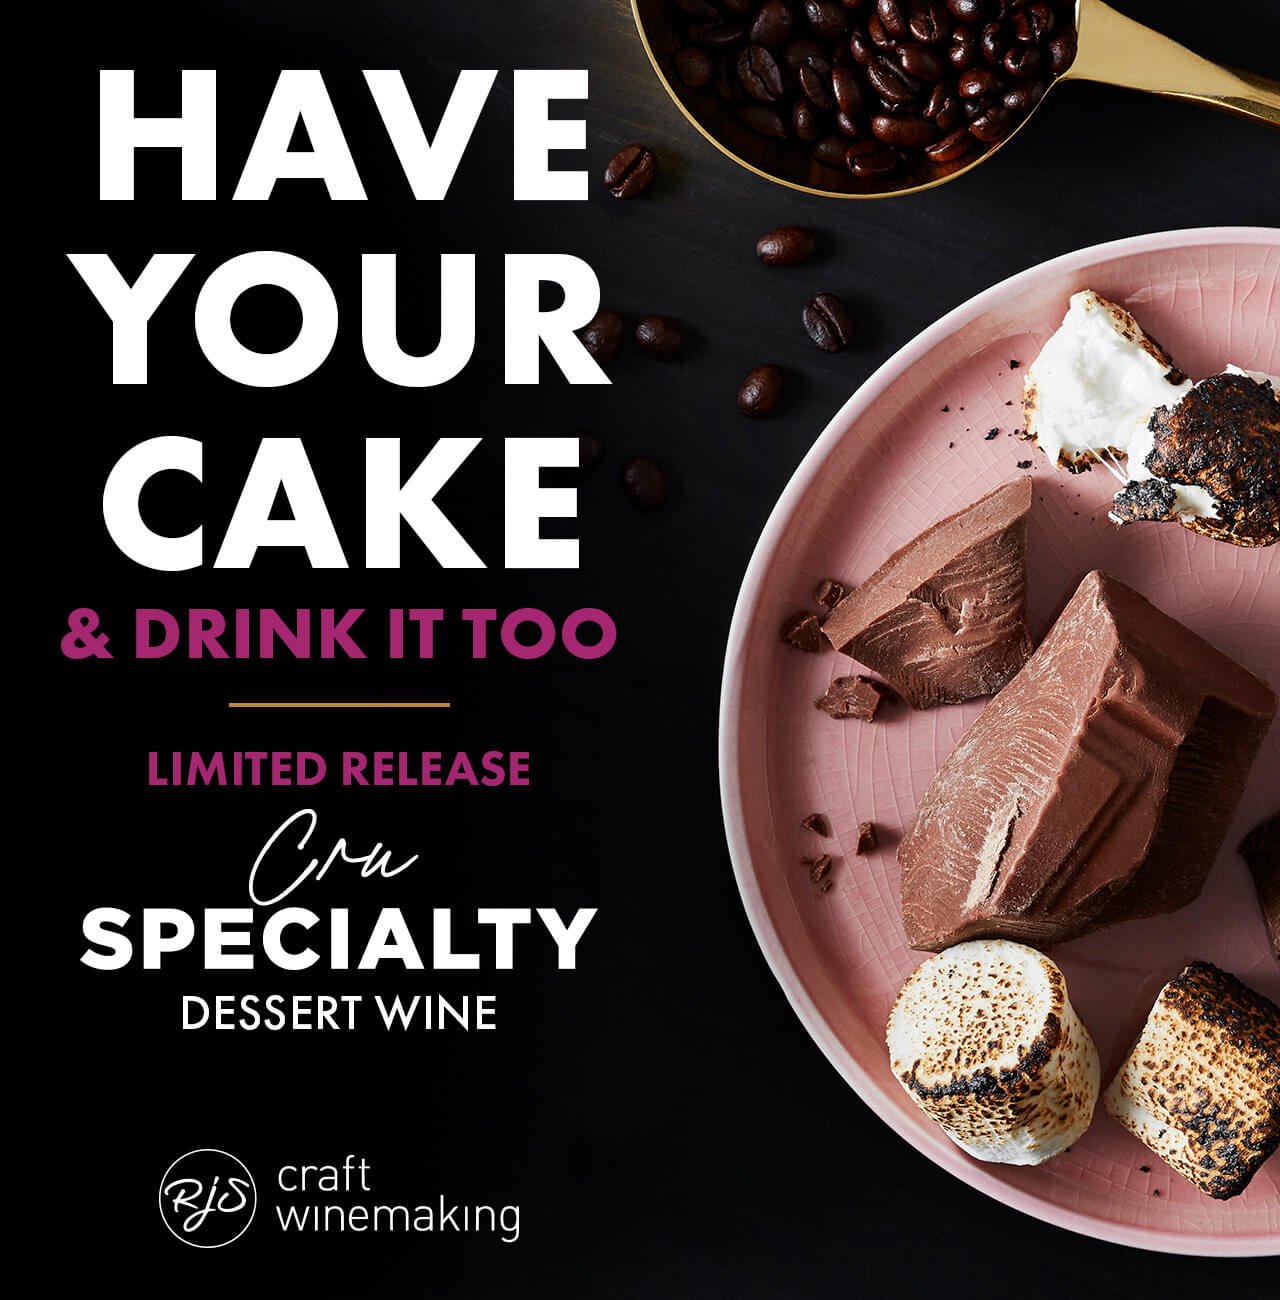 Have Your Cake and Drink it Too! Limited Release RJS Cru Specialty Dessert Wine Pre-Order